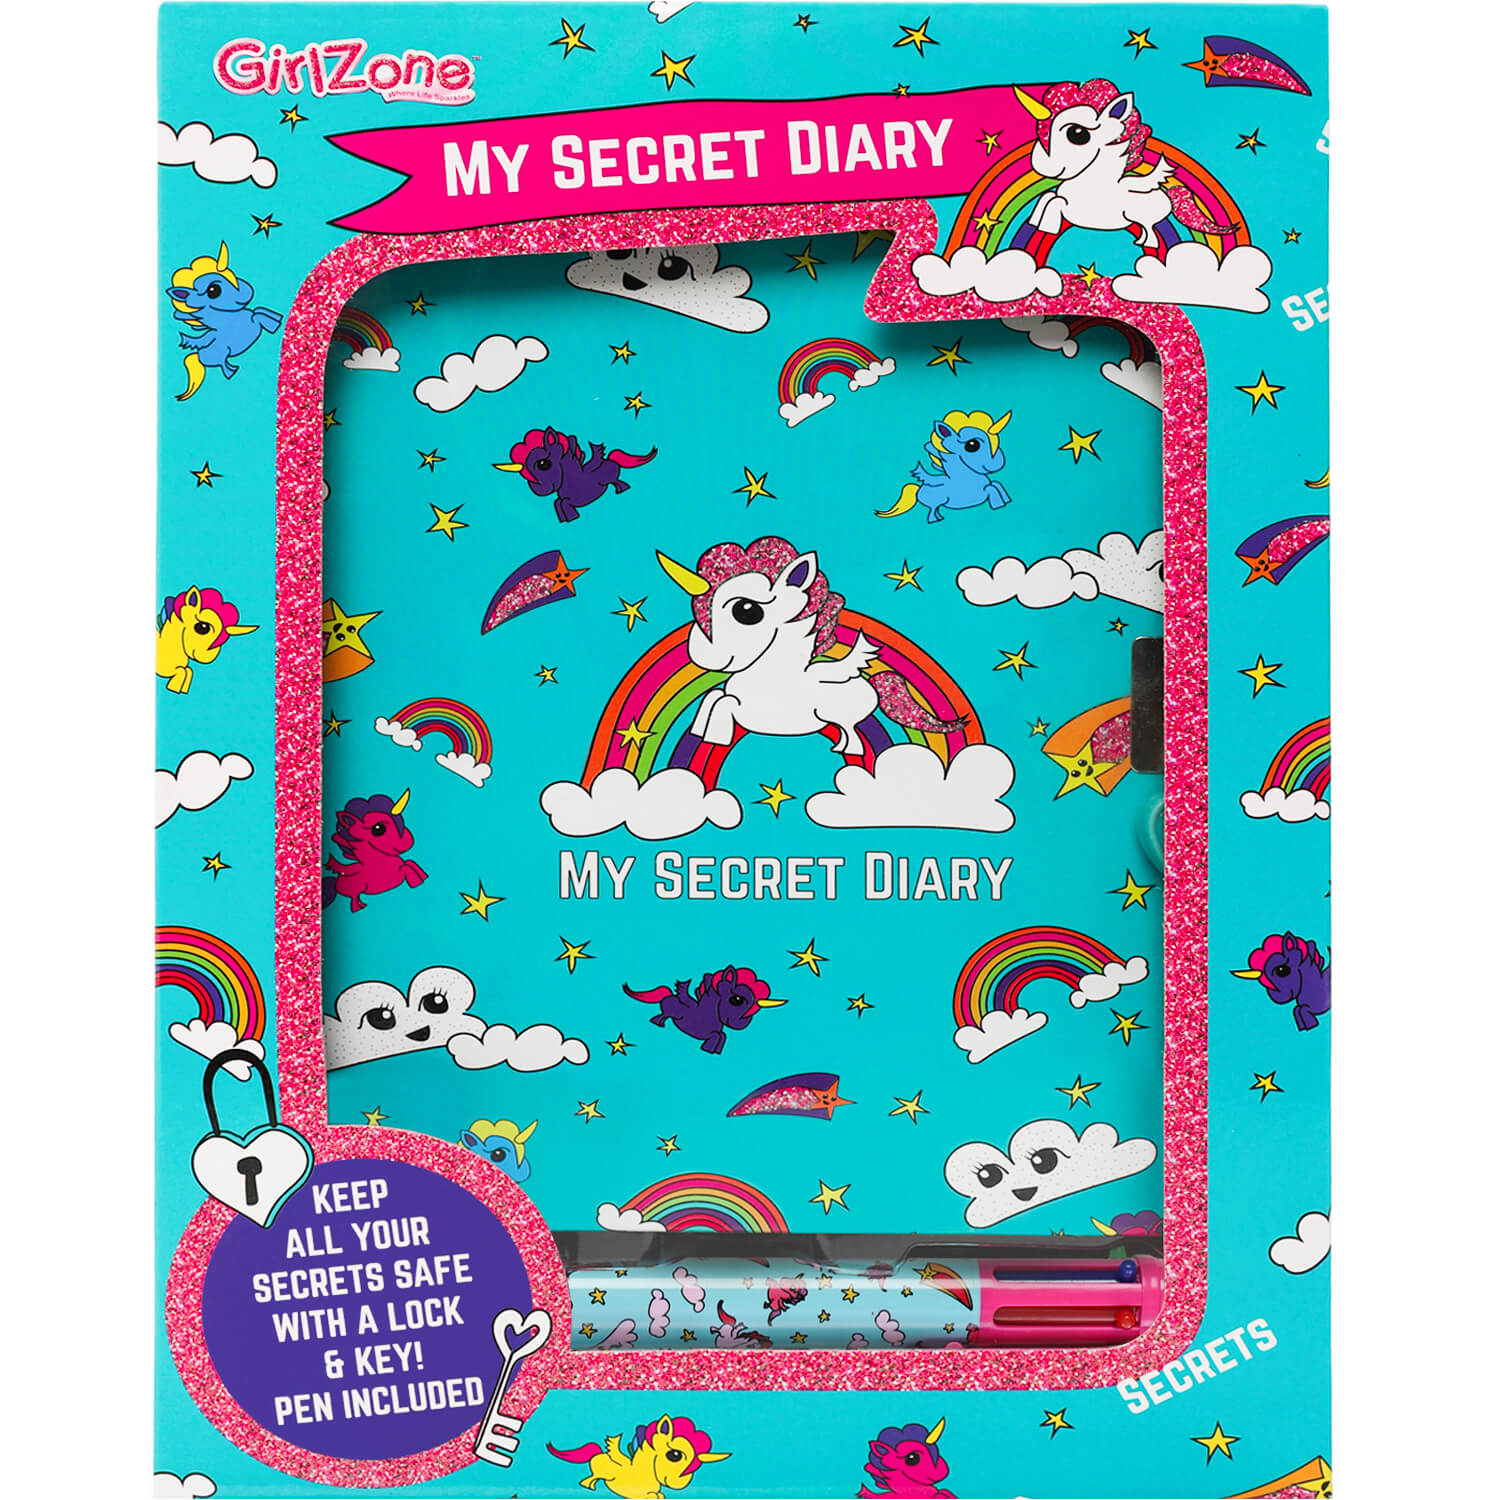 Girls’ lockable diary, Lockable diary for girls